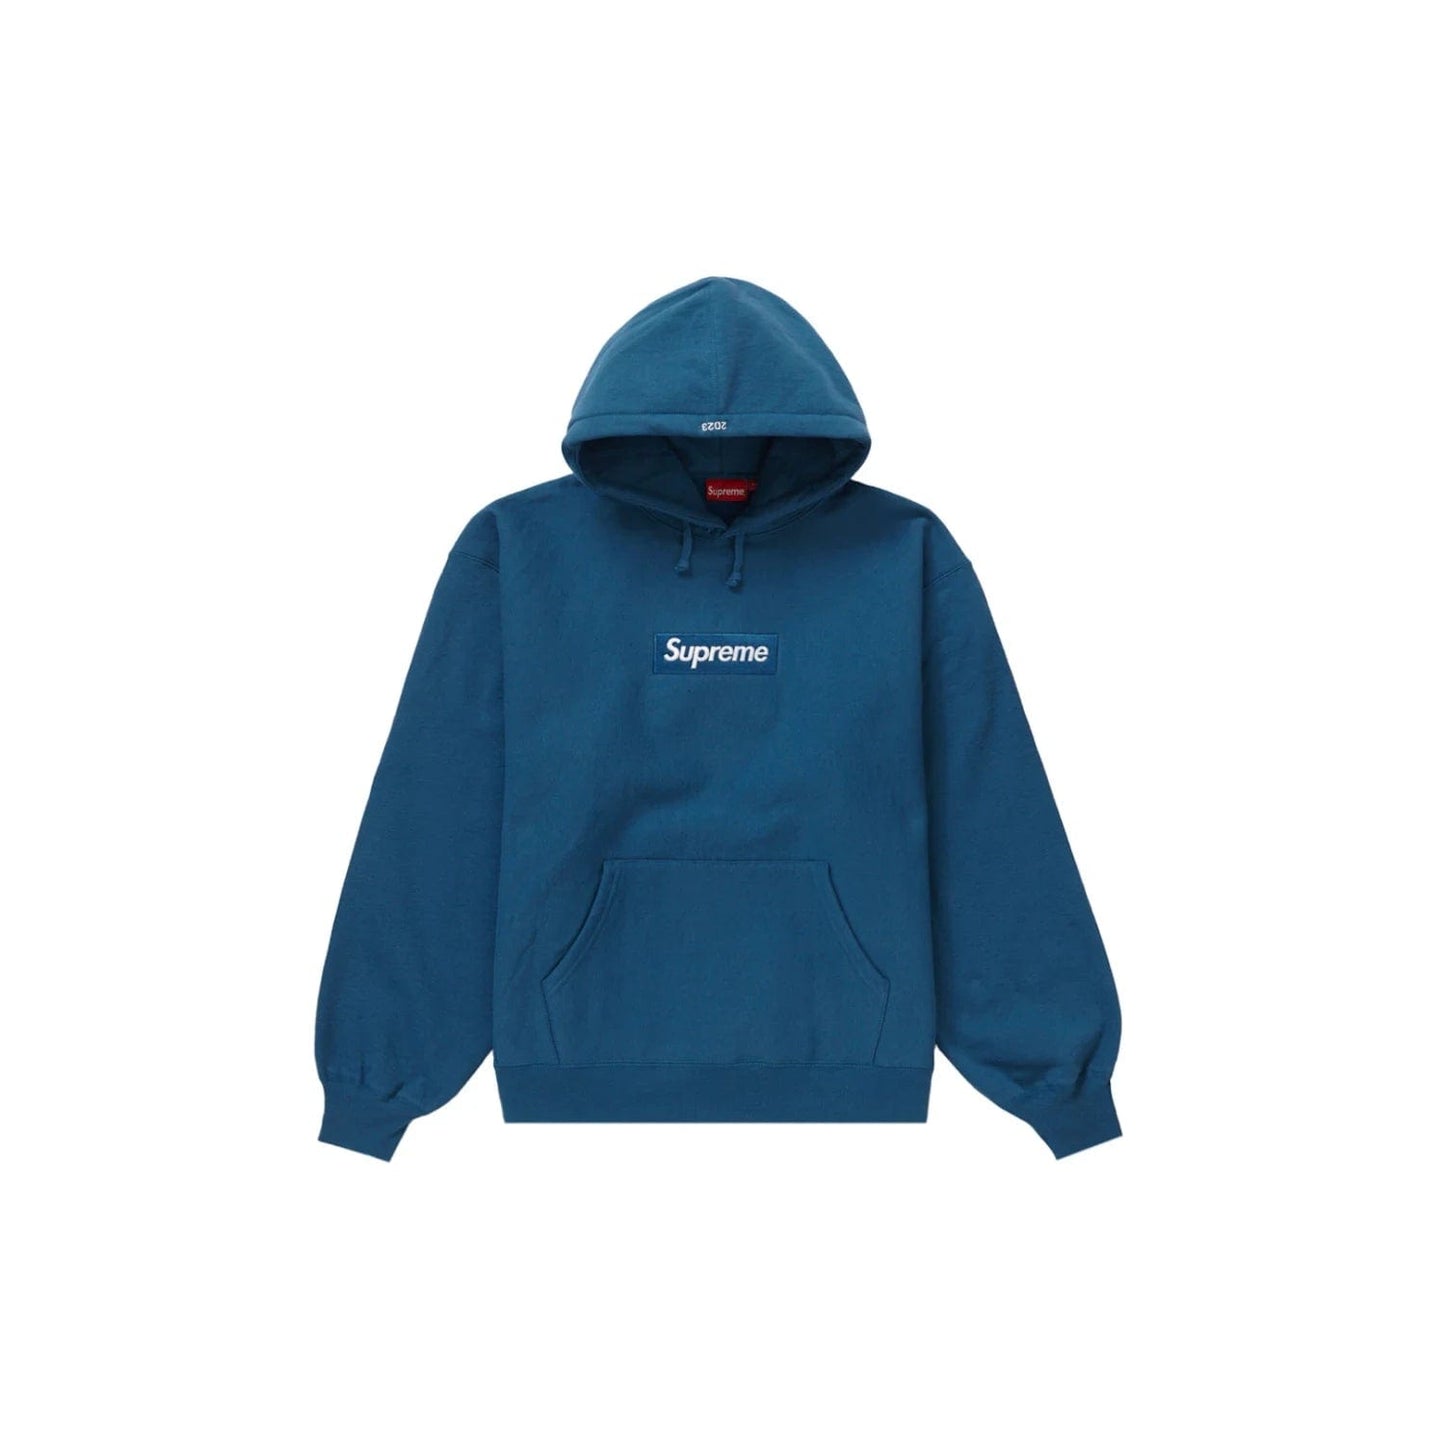 Supreme Box Logo Hooded Sweatshirt (FW23) Blue - Image 1 - Only at www.BallersClubKickz.com - Supreme Box Logo Hooded Sweatshirt (FW23) - Soft cotton/poly blend with rib-knit cuffs and hem for a comfortable fit. Blue colorway with bold Supreme Box Logo graphic. Make a statement while staying stylish and warm.